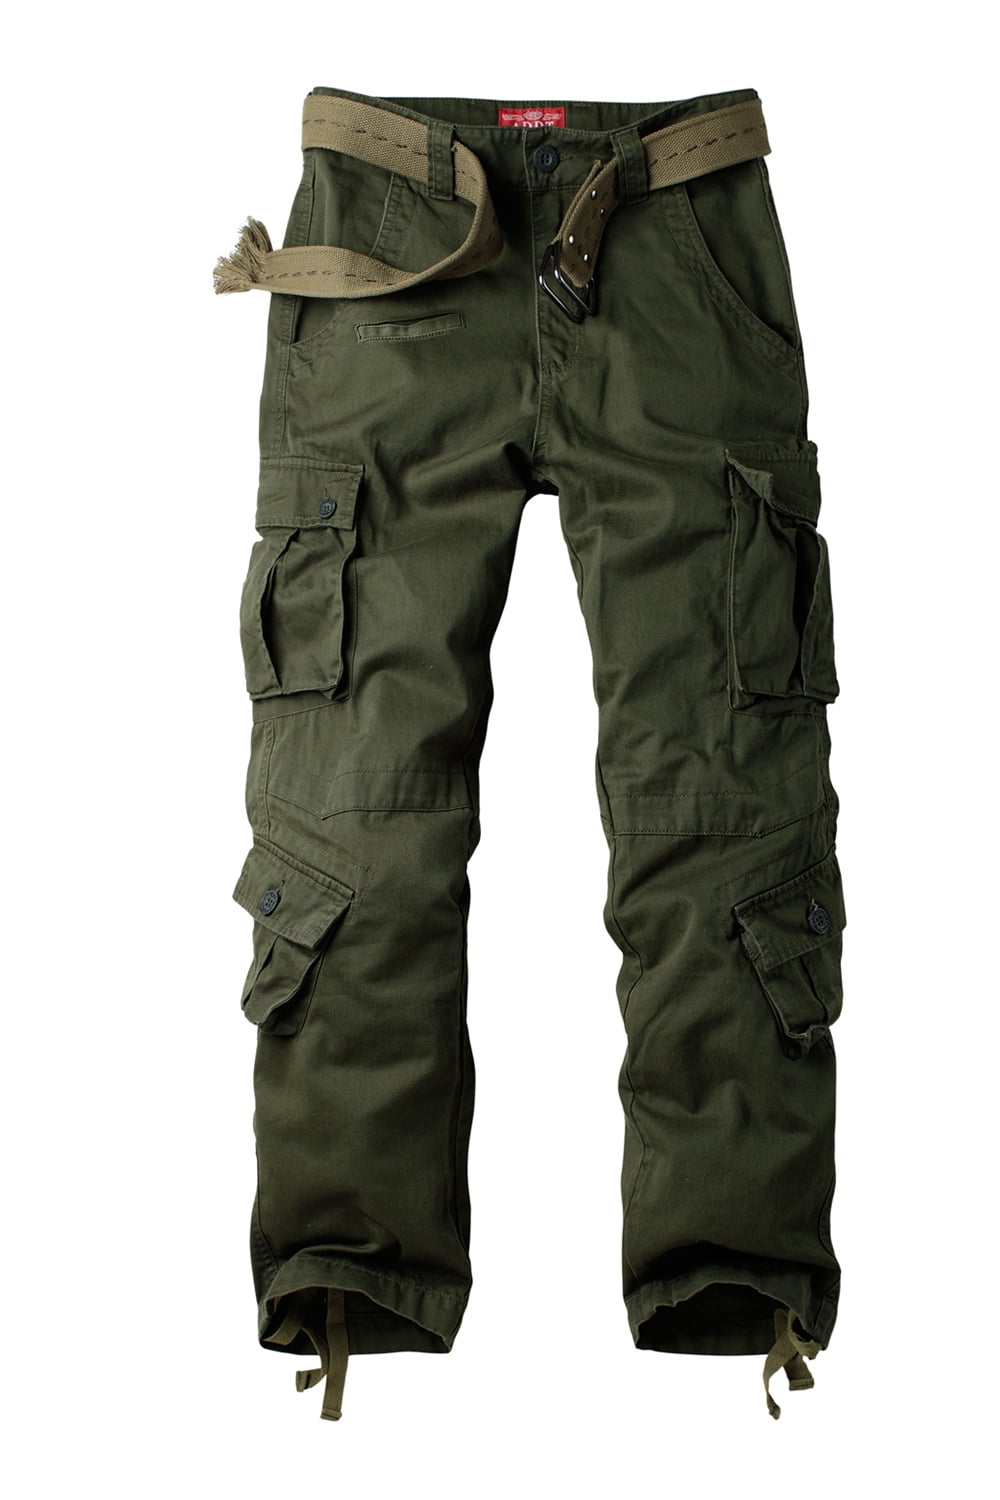 TRGPSG Men's Wild Relaxed Fit Cargo Pants with 9 Pockets(No Belt ...